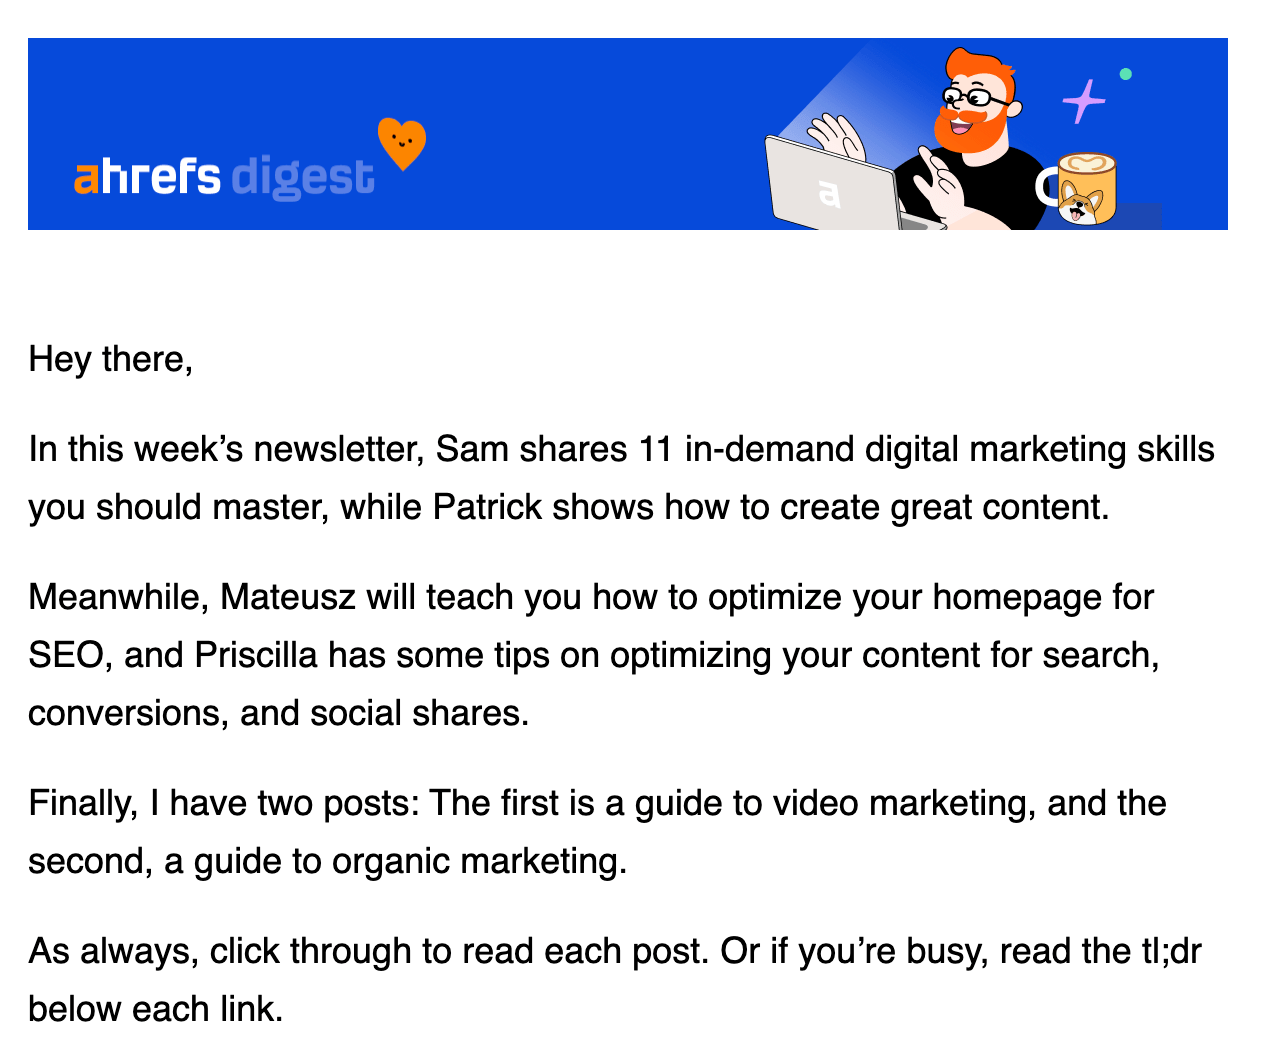 Example of Ahrefs' weekly newsletter